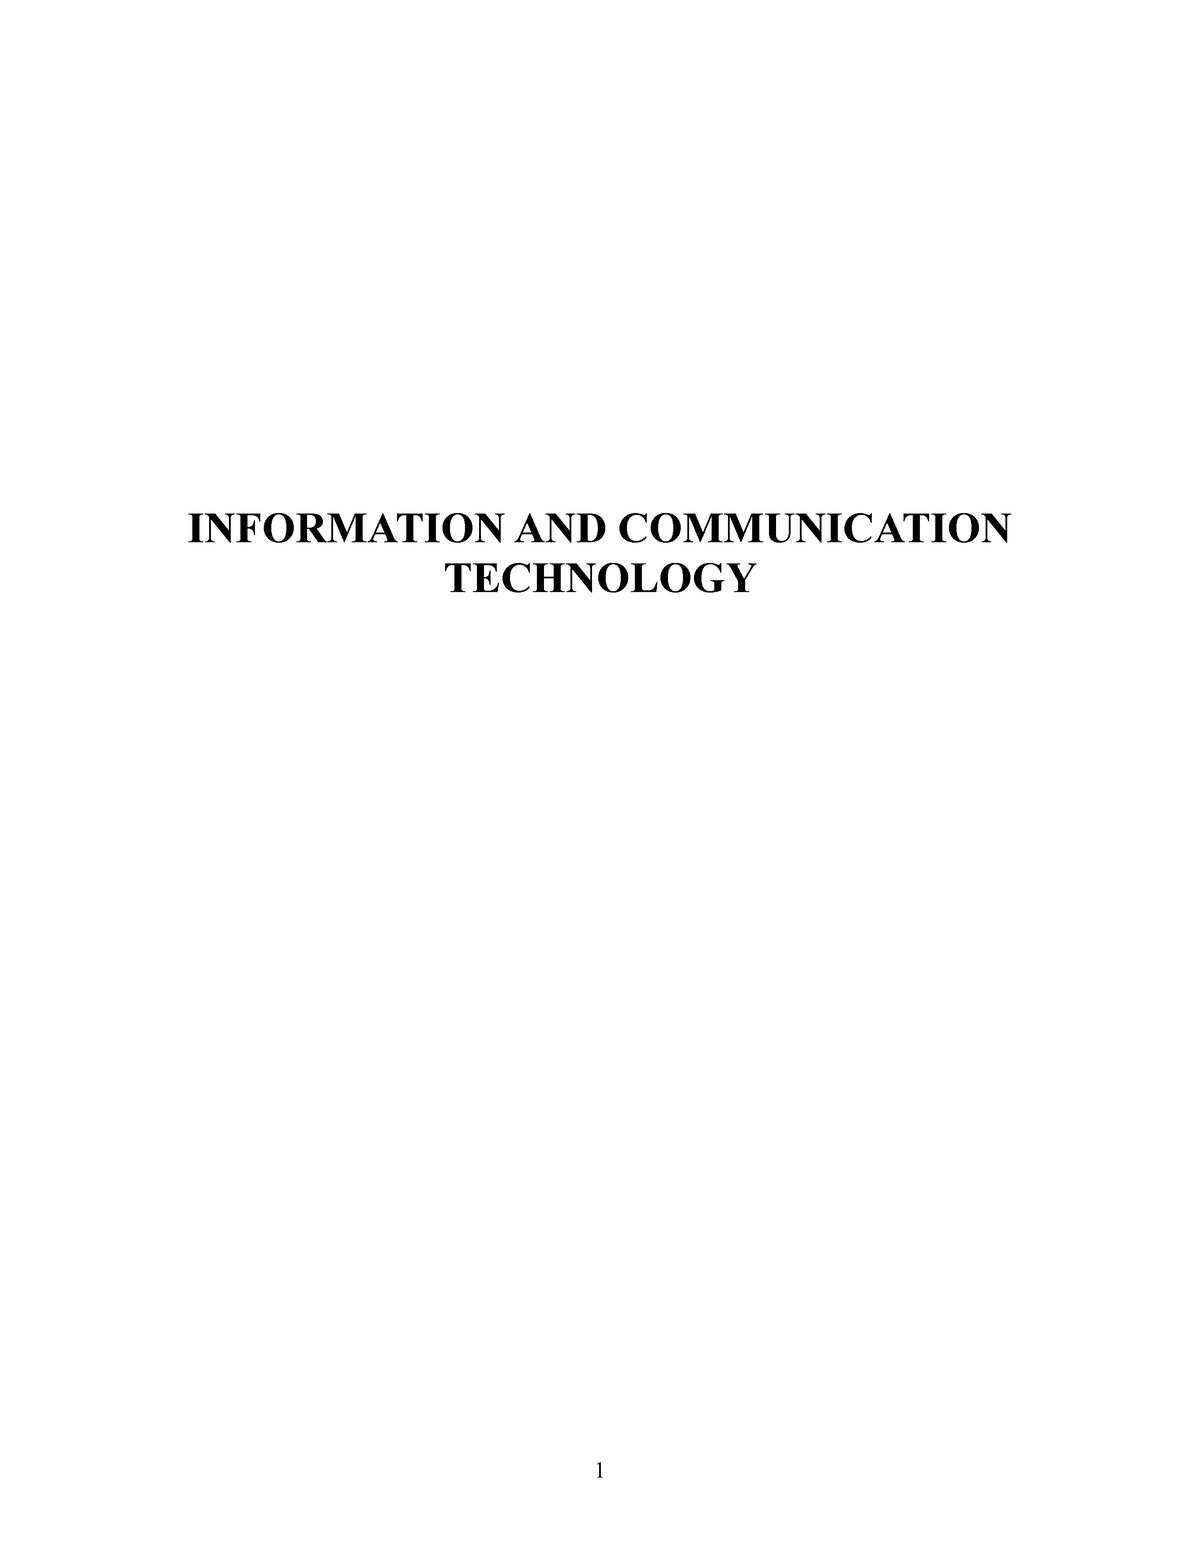 thesis information technology and communication